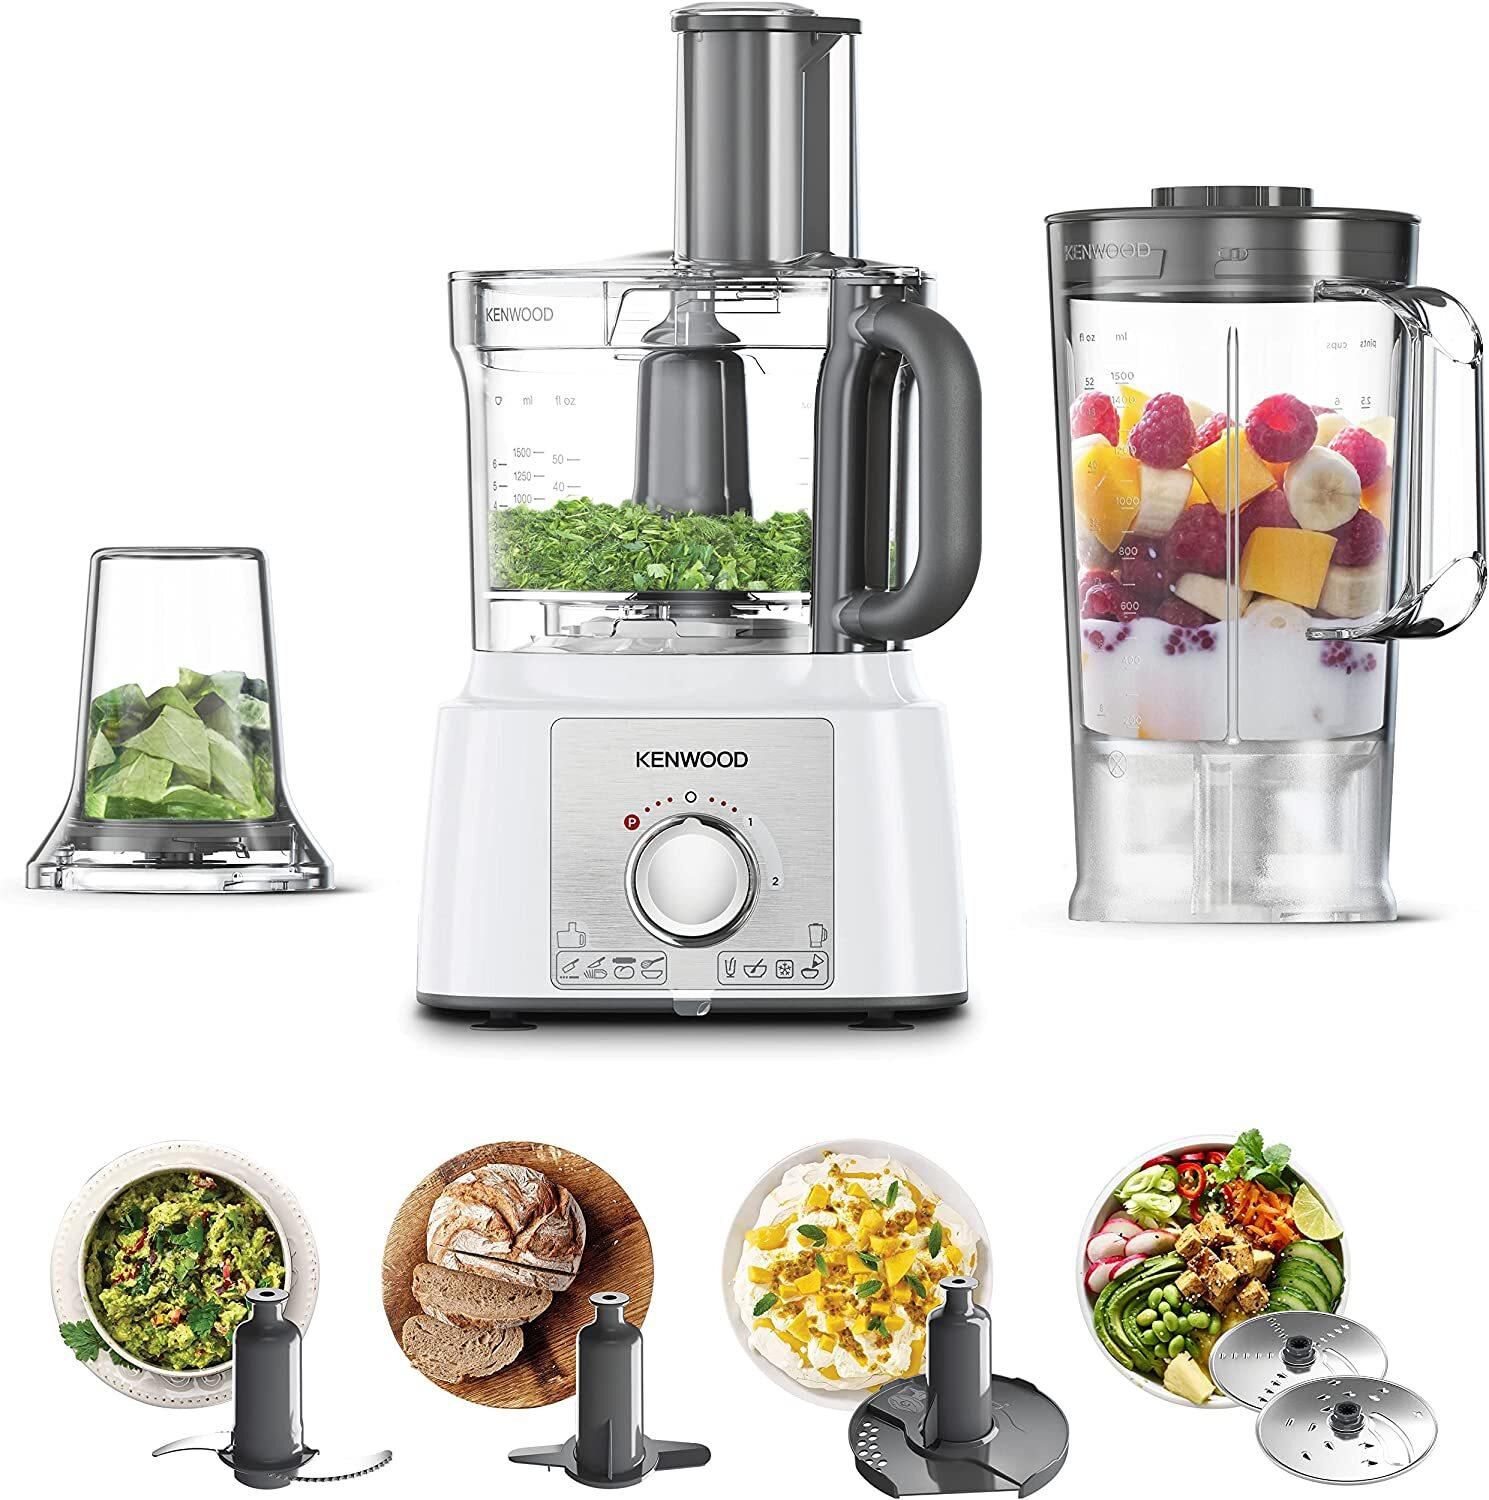 KENWOOD Food Processor 1000W Multi-Functional with 2 Stainless Steel Disks, Blender, Grinder Mill, Whisk, Dough Maker FDP65.400WH White
